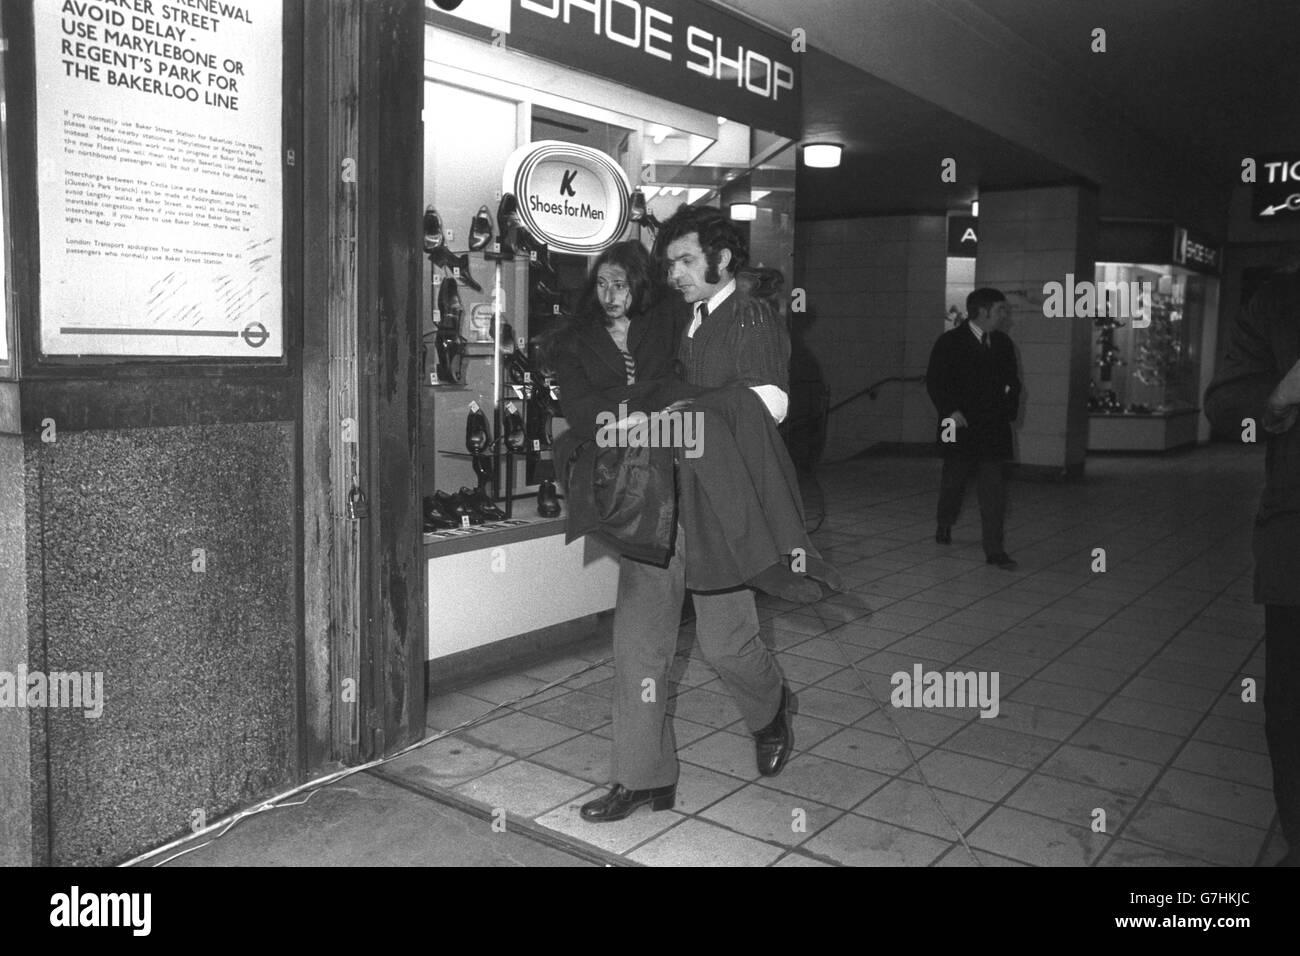 A shoeless young woman, injured in the Tube crash at Moorgate station, being carried to a waiting ambulance. Stock Photo